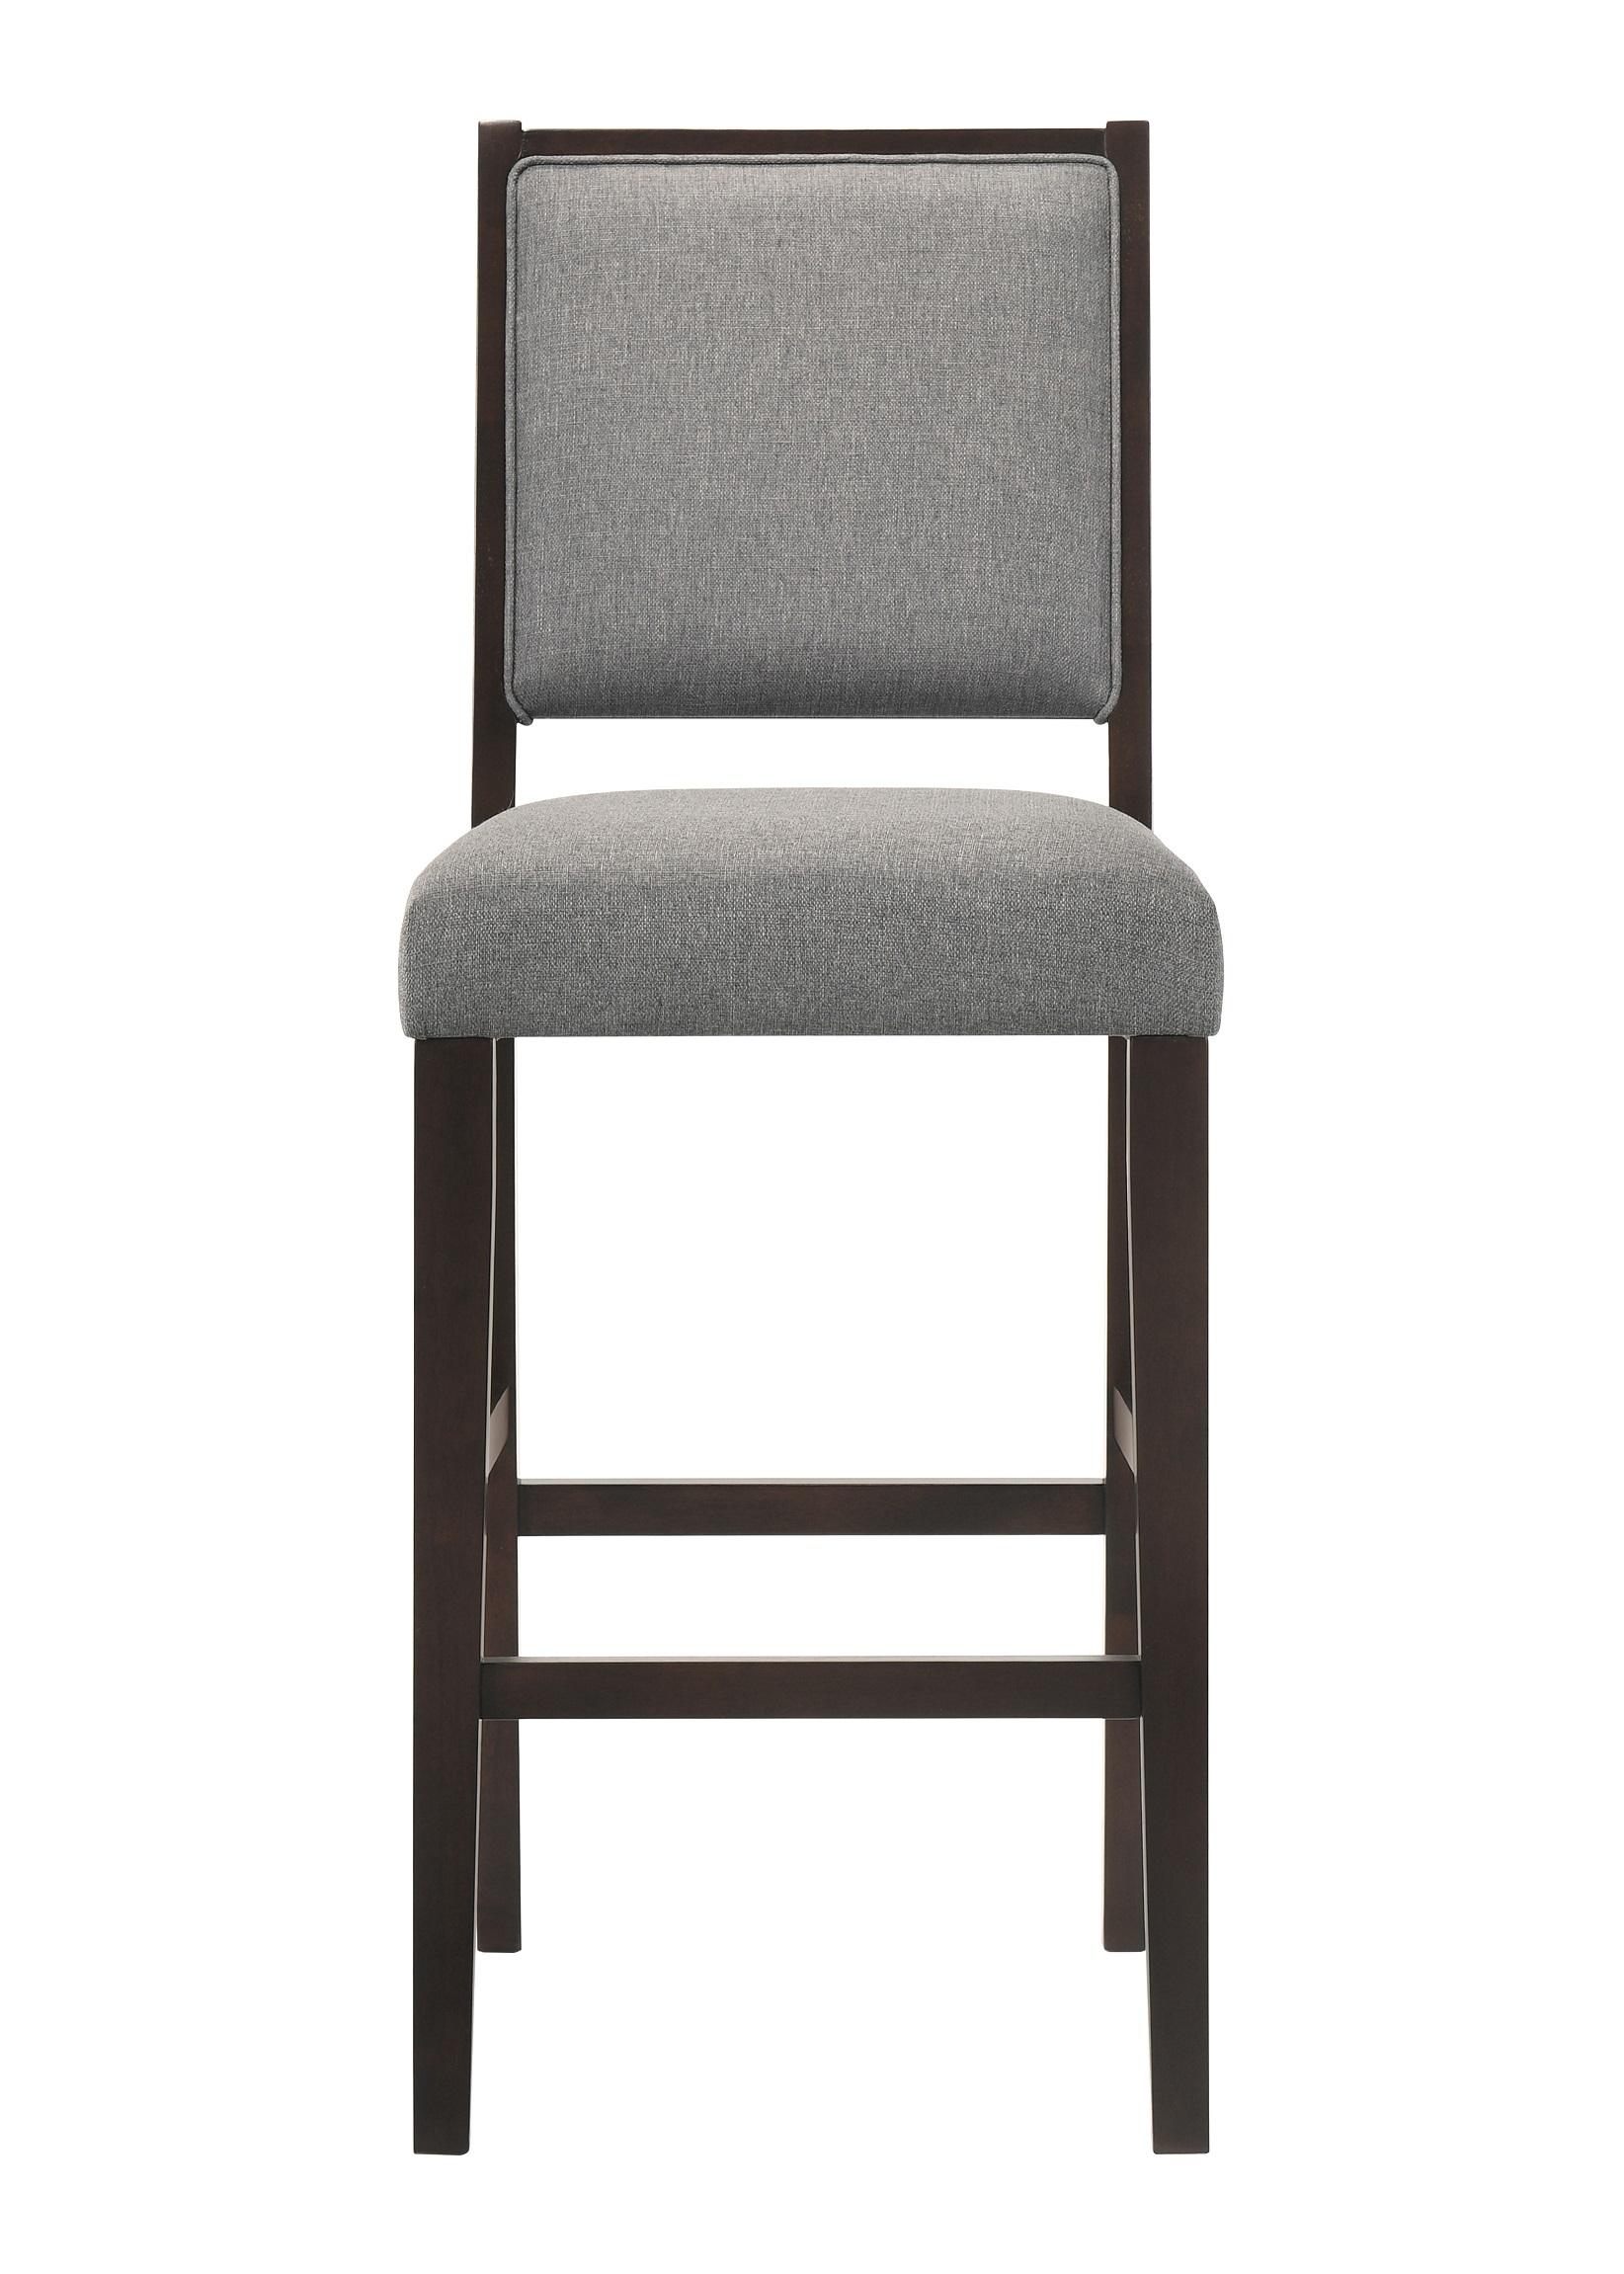 Transitional Bar Stool Set 183472 183472 in Gray Fabric